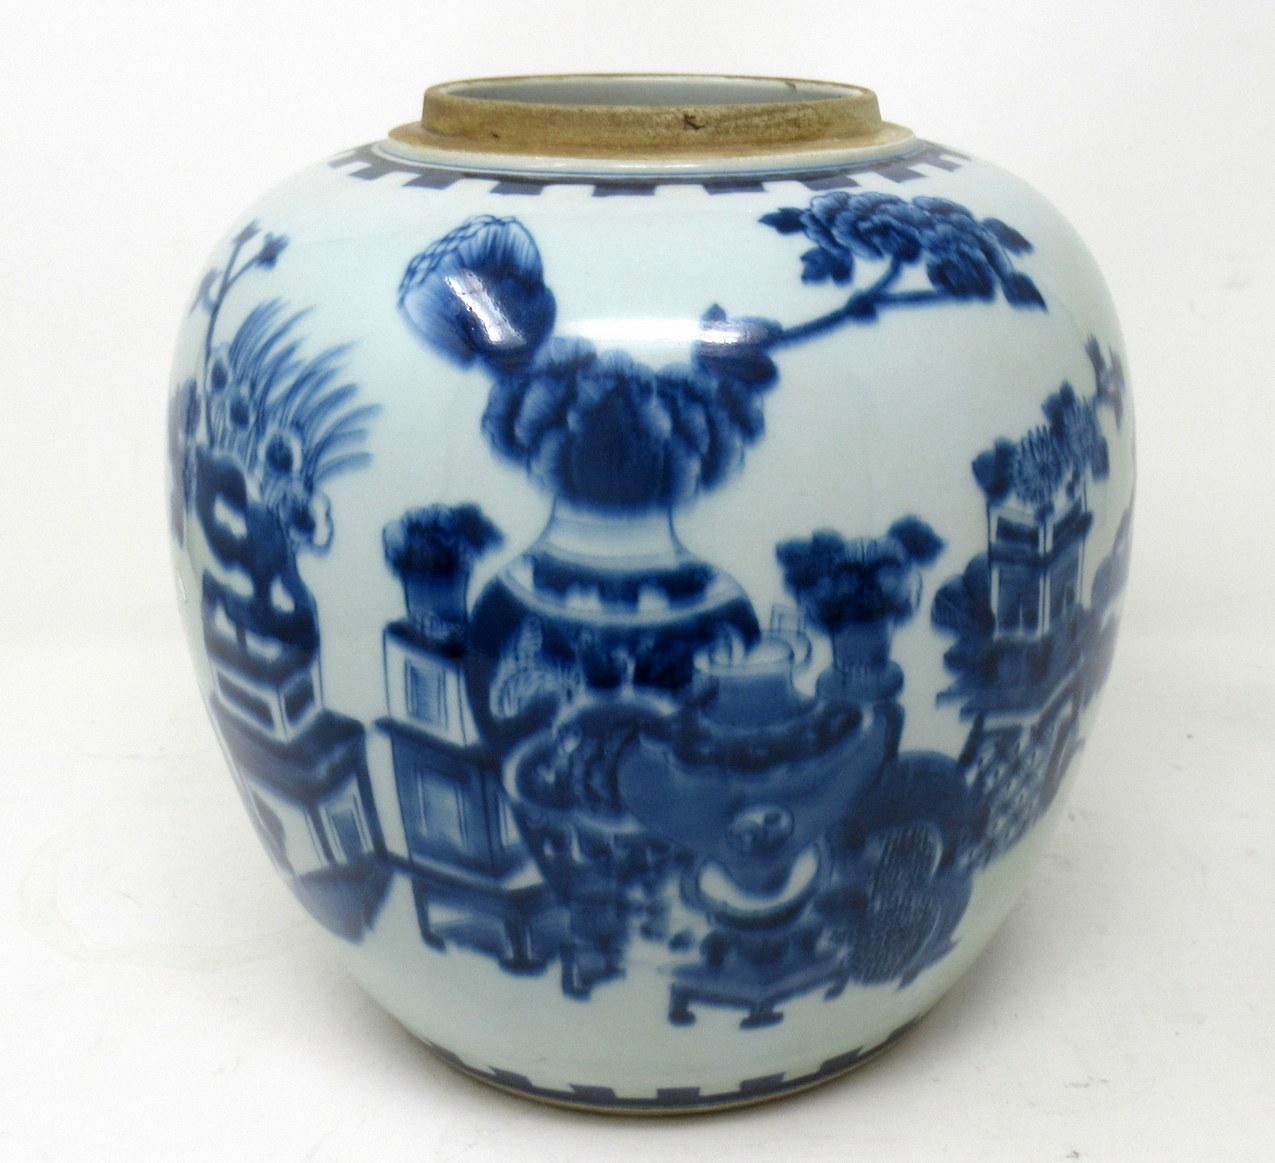 A very fine example of a Chinese Export Hand Decorated Blue and White Porcelain Ginger Jar of unusually large and heavy gauge proportions, superbly decorated depicting the hundred antiques pattern within upper and lower dental banded decoration.